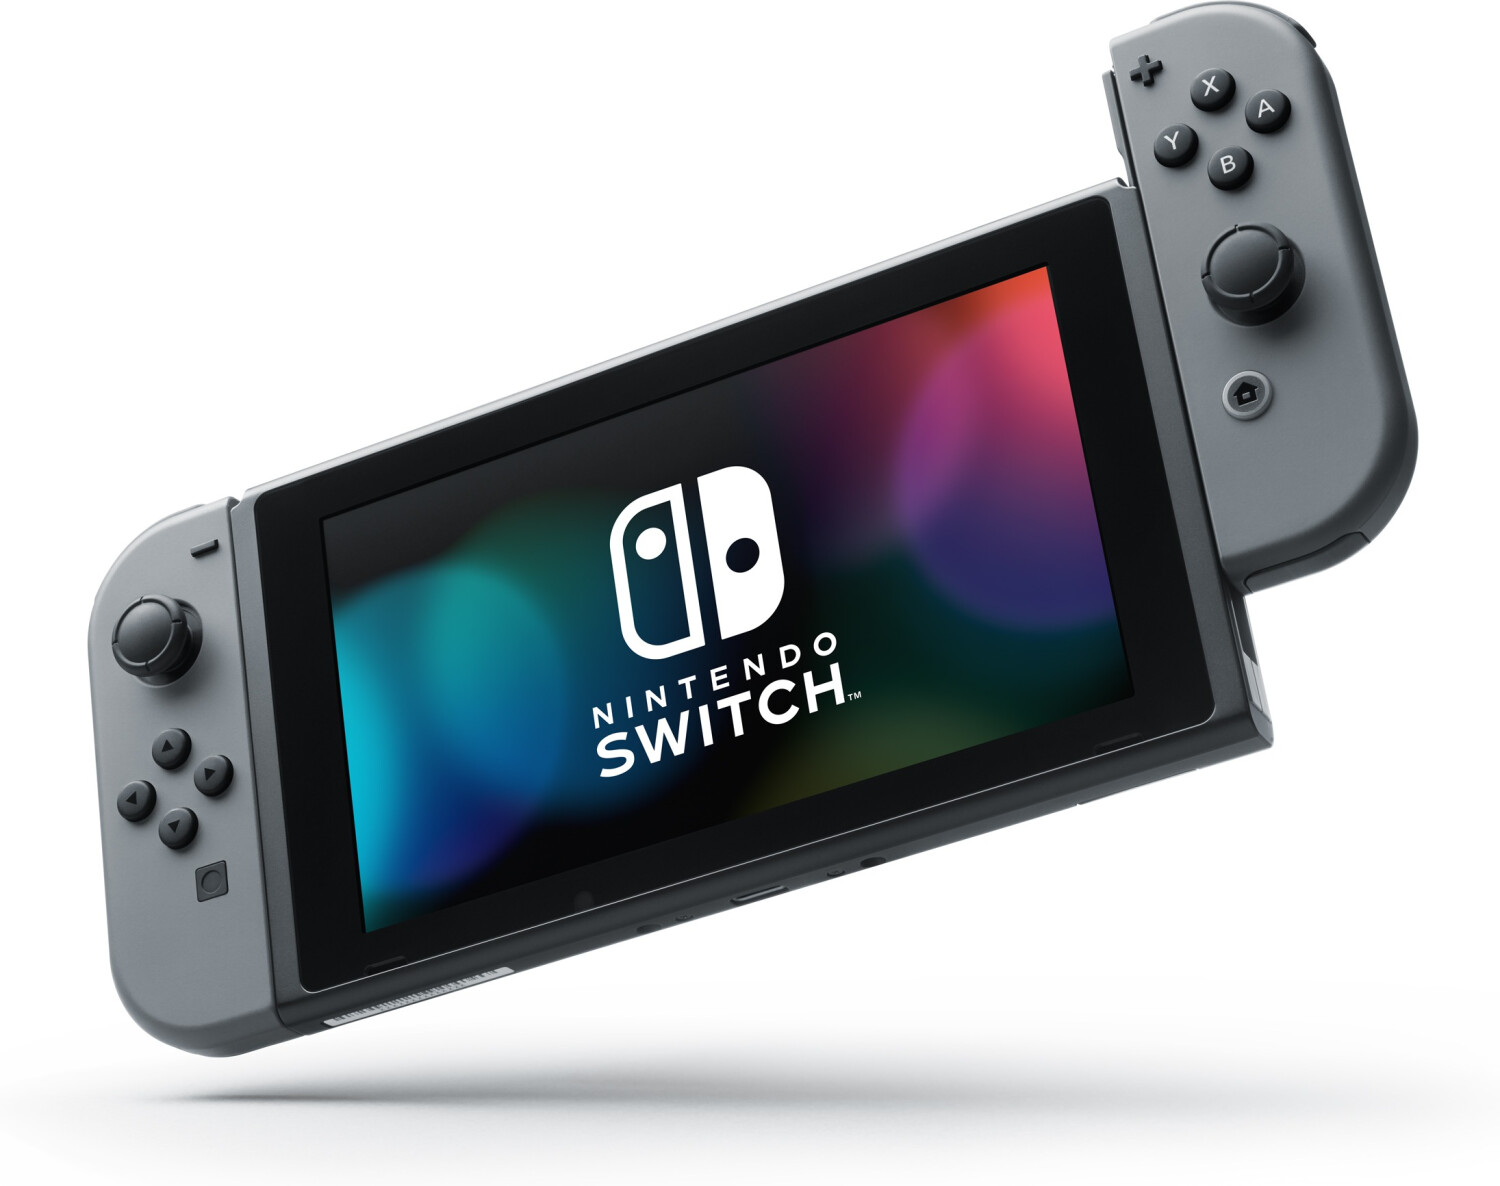 Nintendo Switch has sold 84.59m as of March 31, 2021 - XboxEra